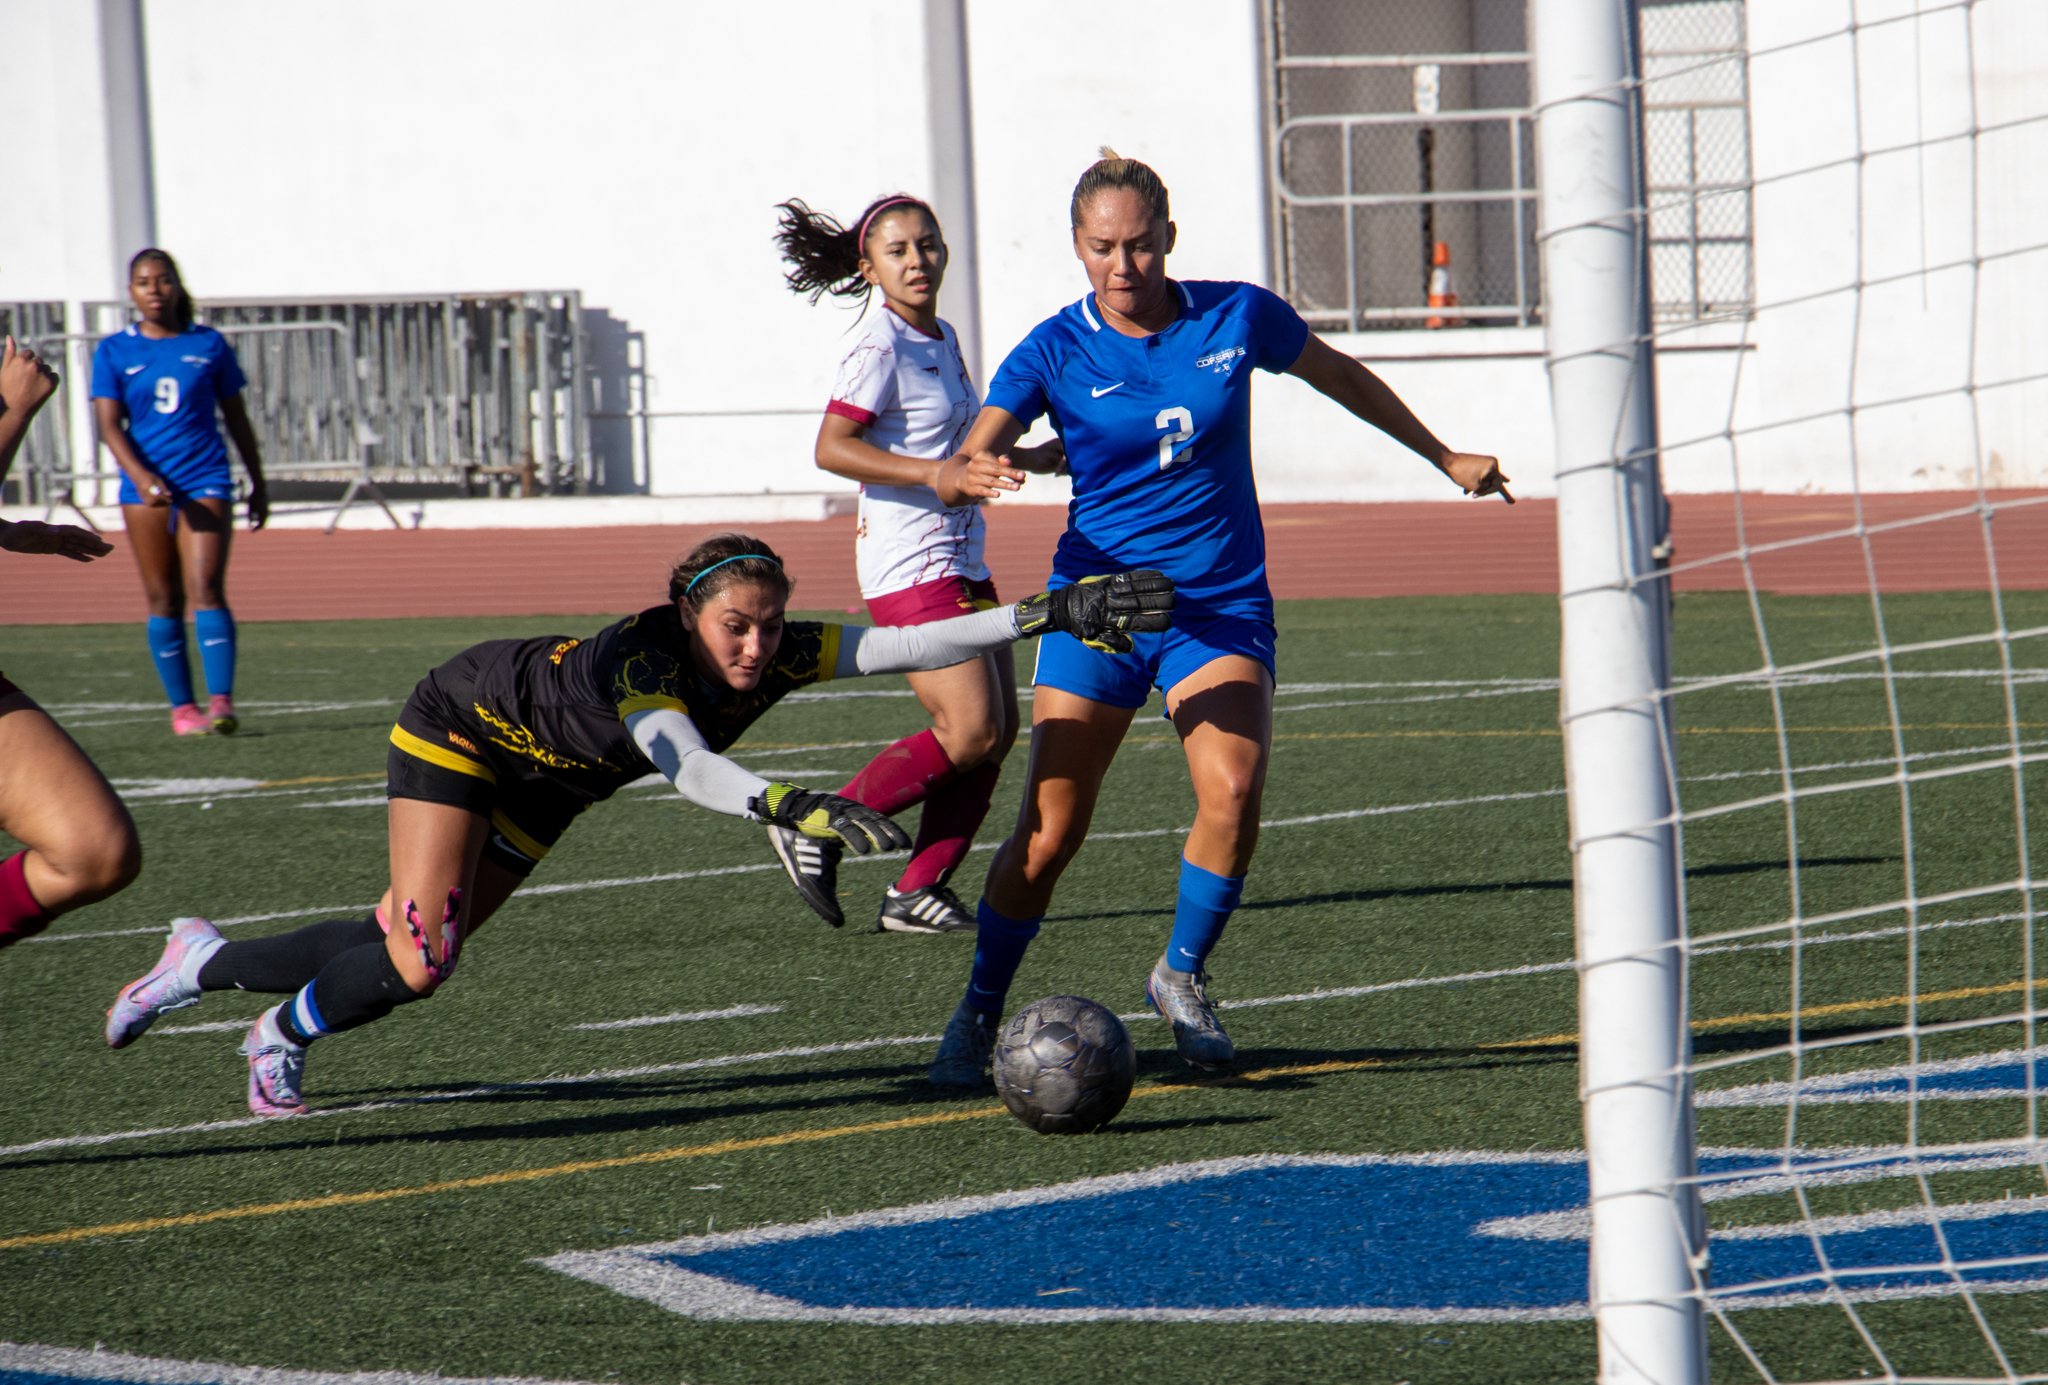  SMC Forward Alanis Rodriguez takes a shot against an open goal as Glendale Goalie Ashley Messier dives in vain after the ball (Bunker King|The Corsair) 